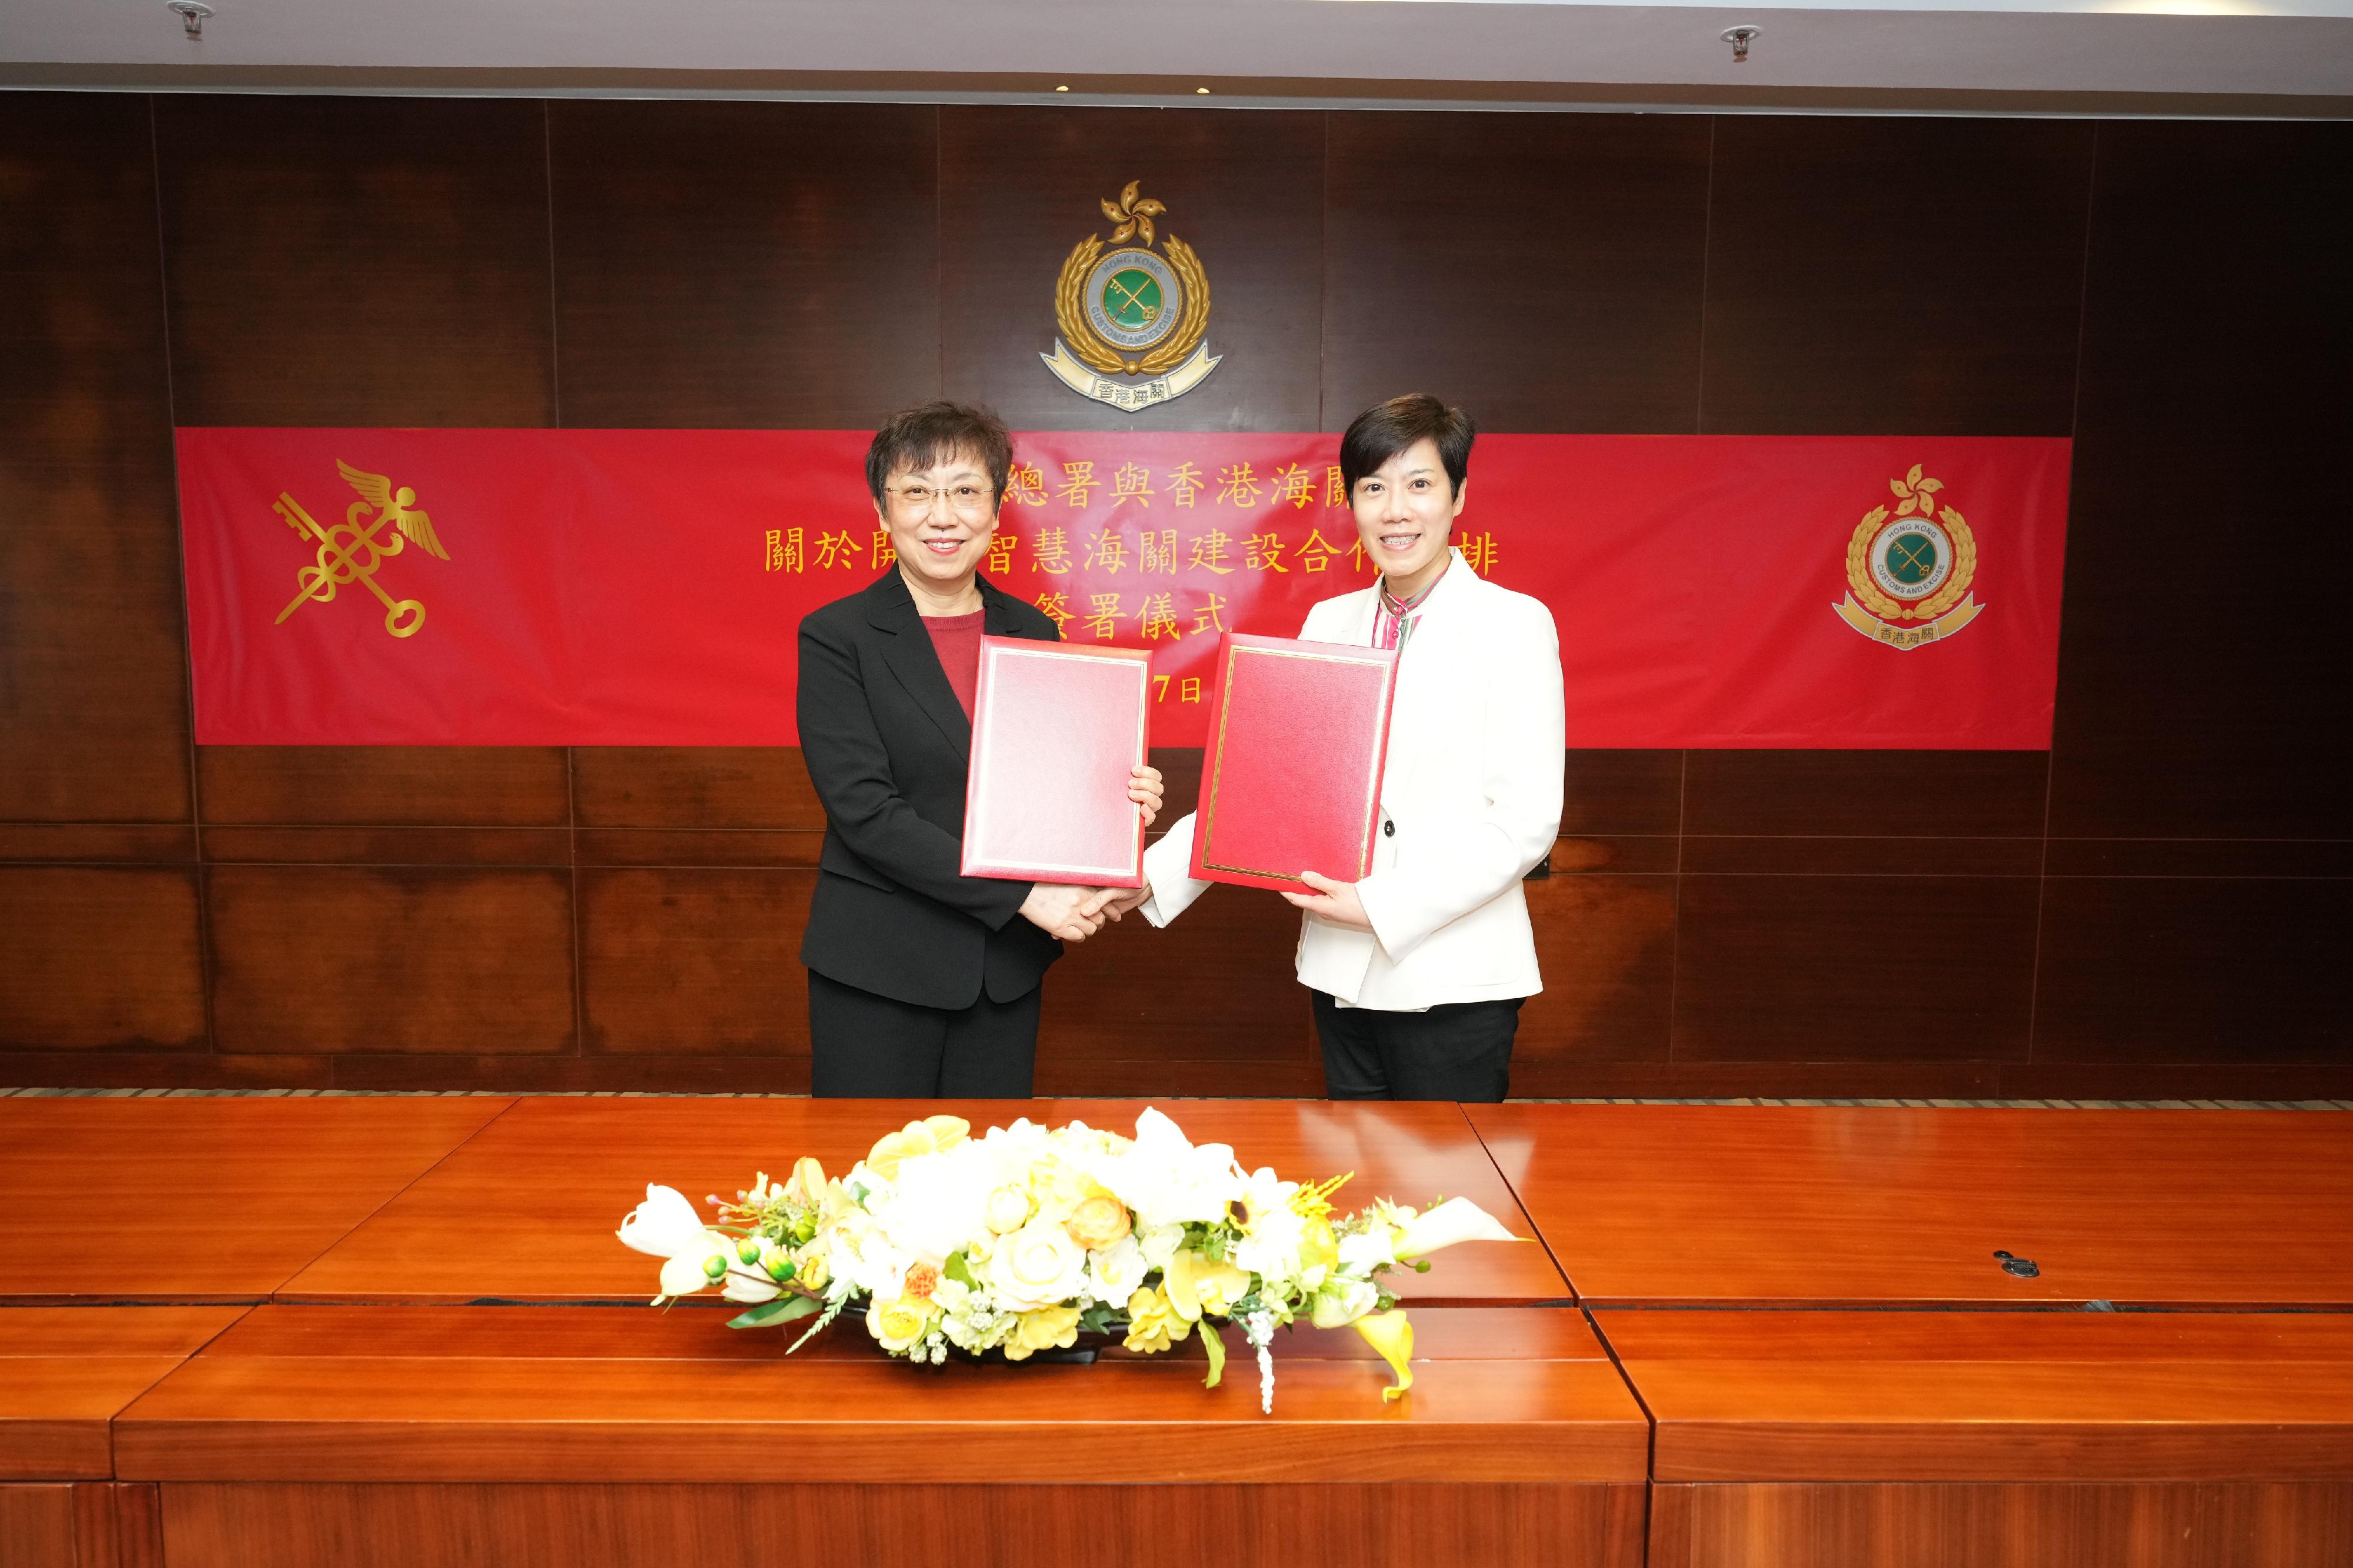 The Commissioner of Customs and Excise, Ms Louise Ho (right), and Vice Minister of General Administration of Customs of the People's Republic of China (GACC) Ms Lv Weihong (left) sign the Co-operative Arrangement on Smart Customs Development between the GACC and Hong Kong Customs at the Customs Headquarters Building today (November 27).